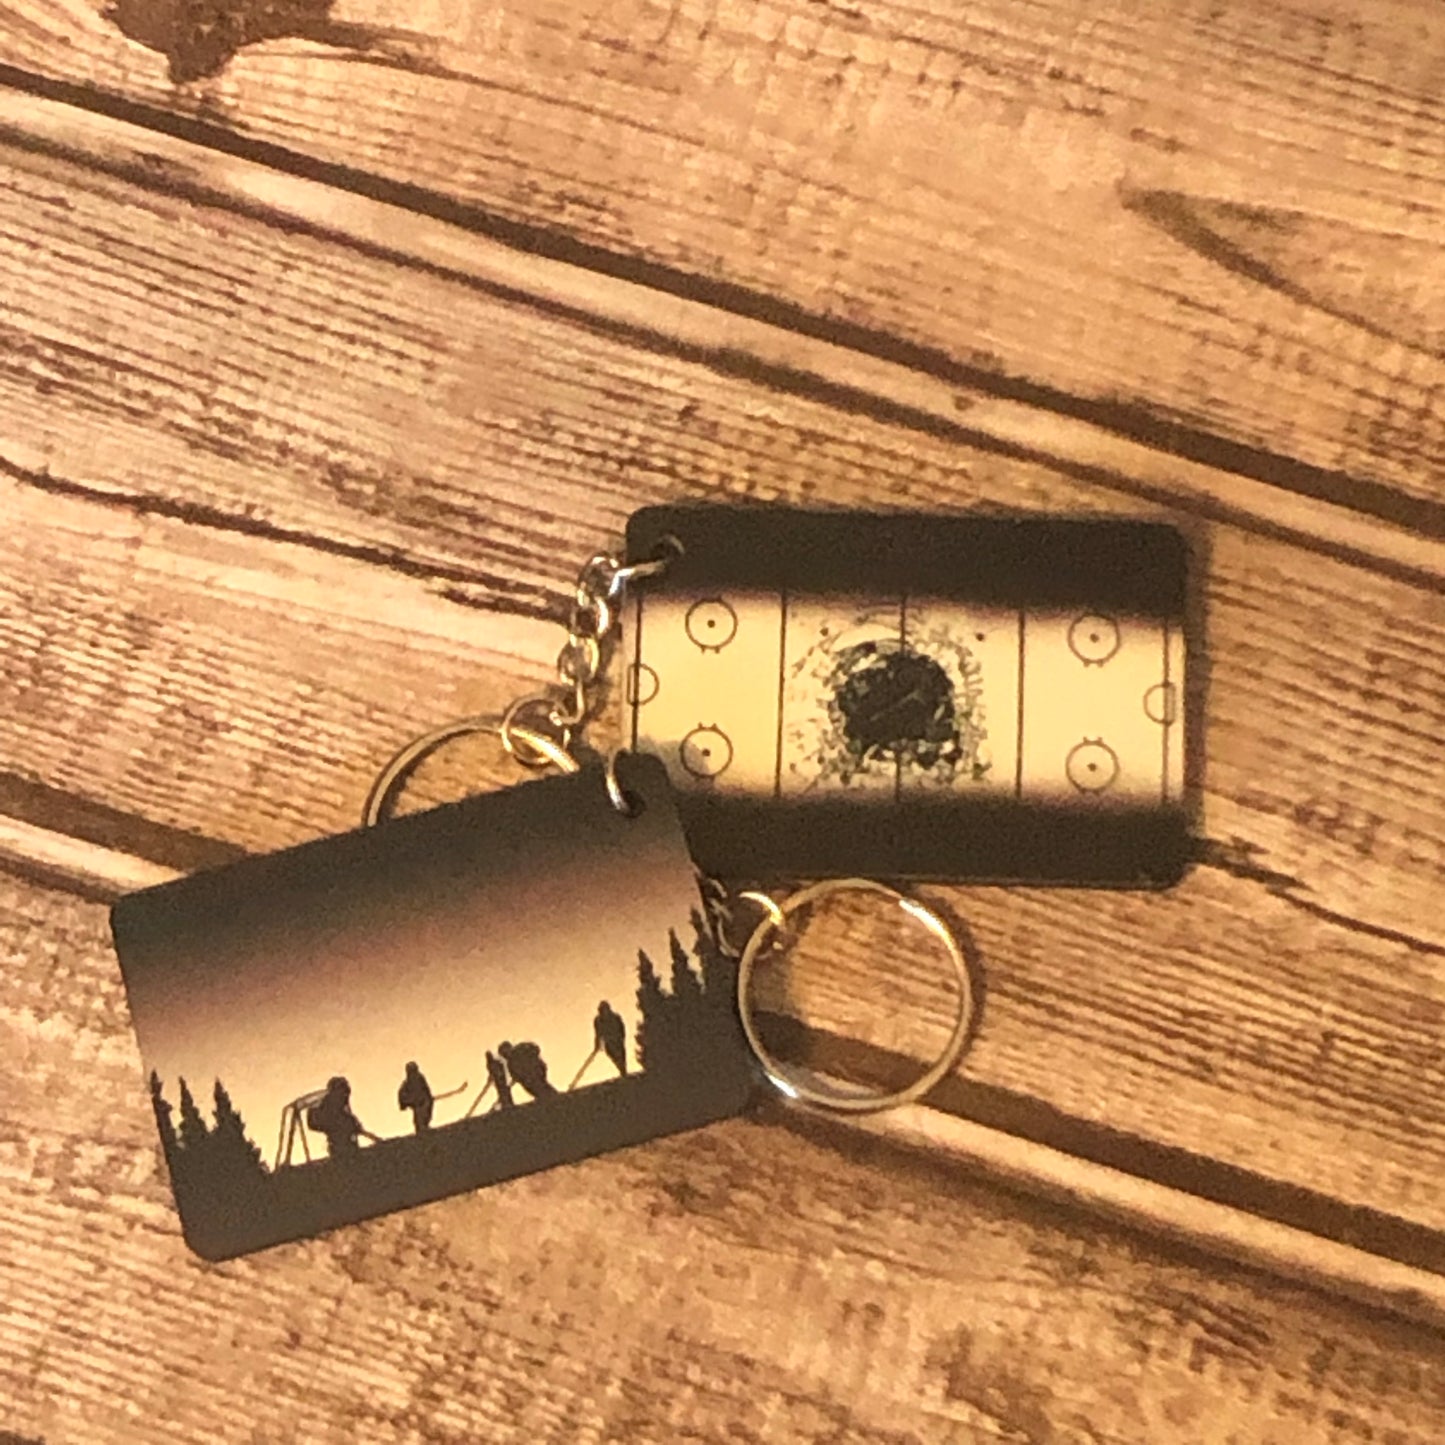 Double Sided Pond Hockey and Breakout Puck Hockey Rink Keychain